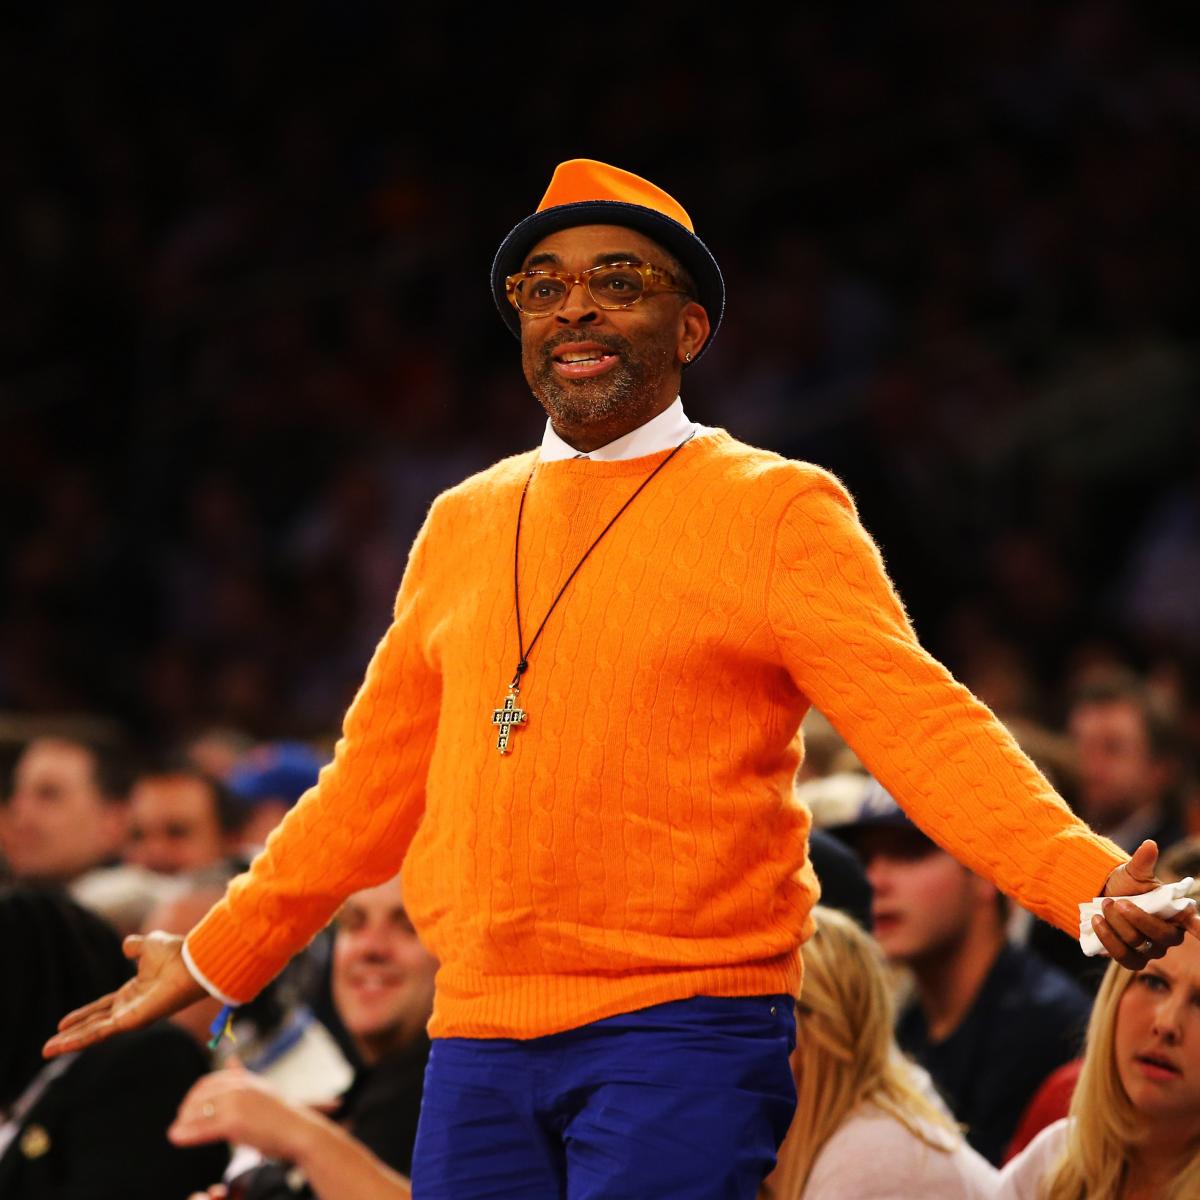 Check Out Spike Lee's $5,000 Louis Vuitton x NBA Suit At The Knicks-Celtics  Game - Fastbreak on FanNation